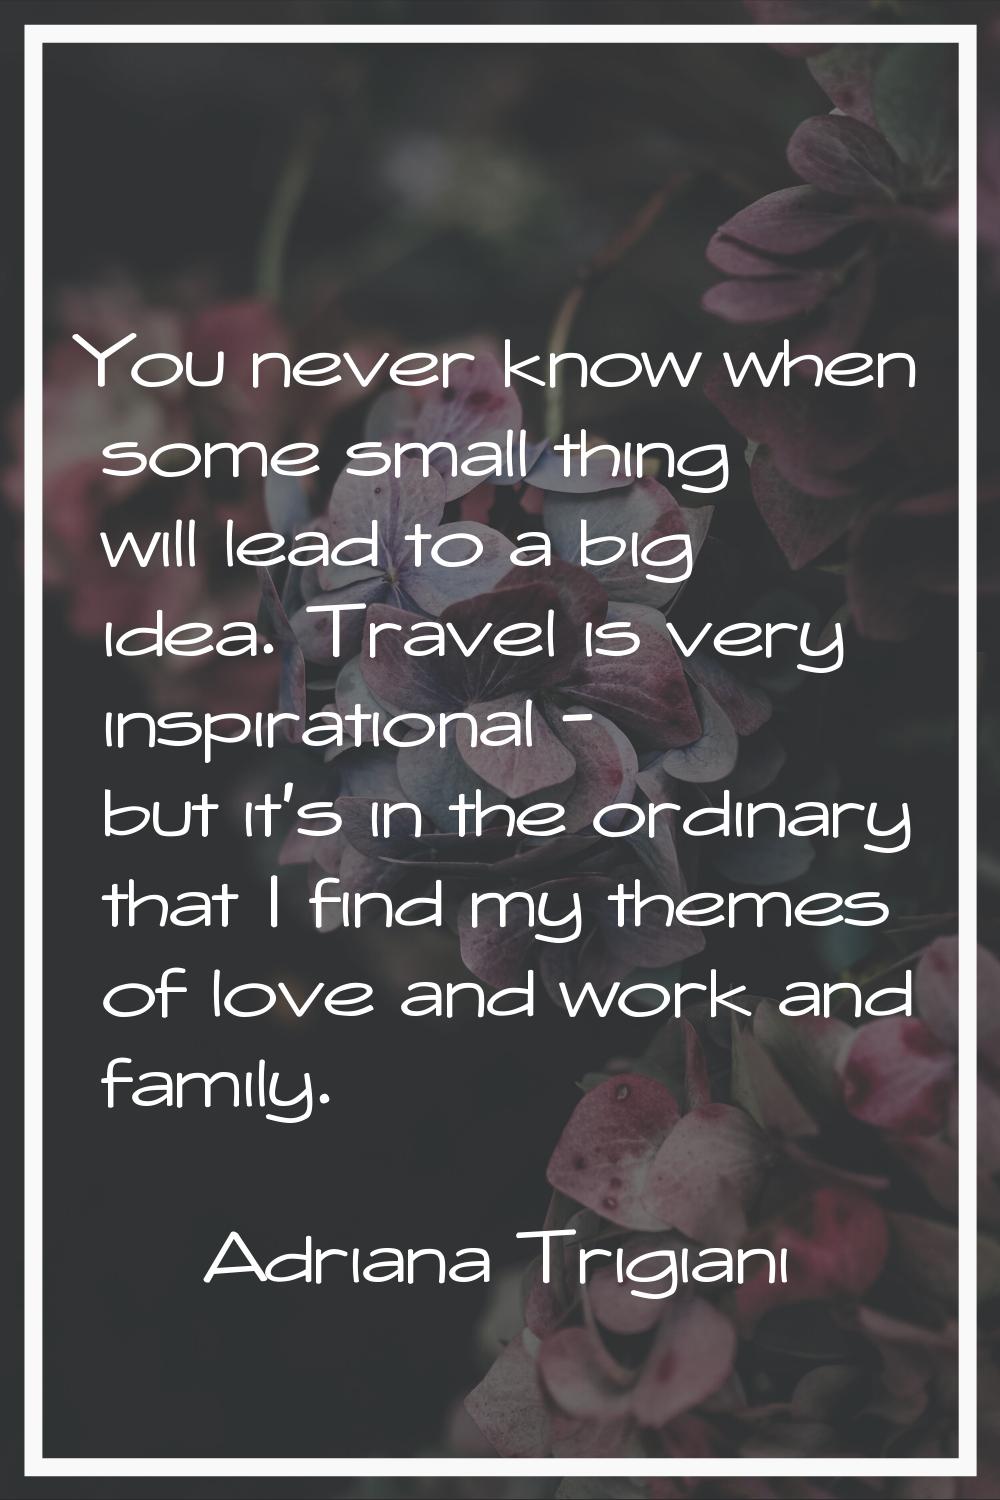 You never know when some small thing will lead to a big idea. Travel is very inspirational - but it